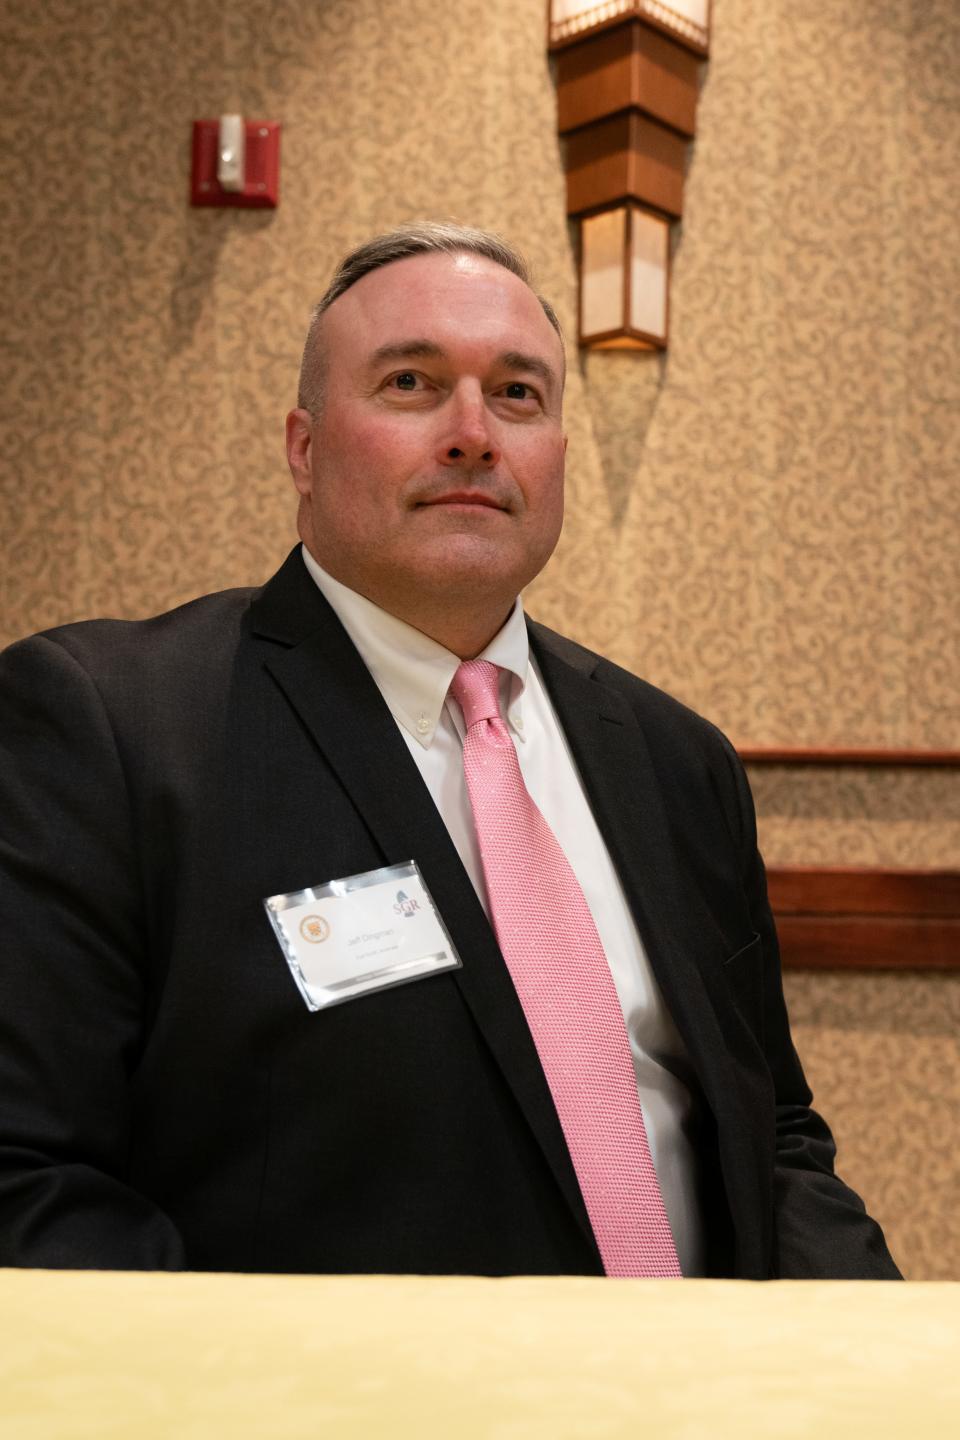 Jeff Dingman, of Fort Smith, Arkansas, is a candidate for the Topeka city manager position.